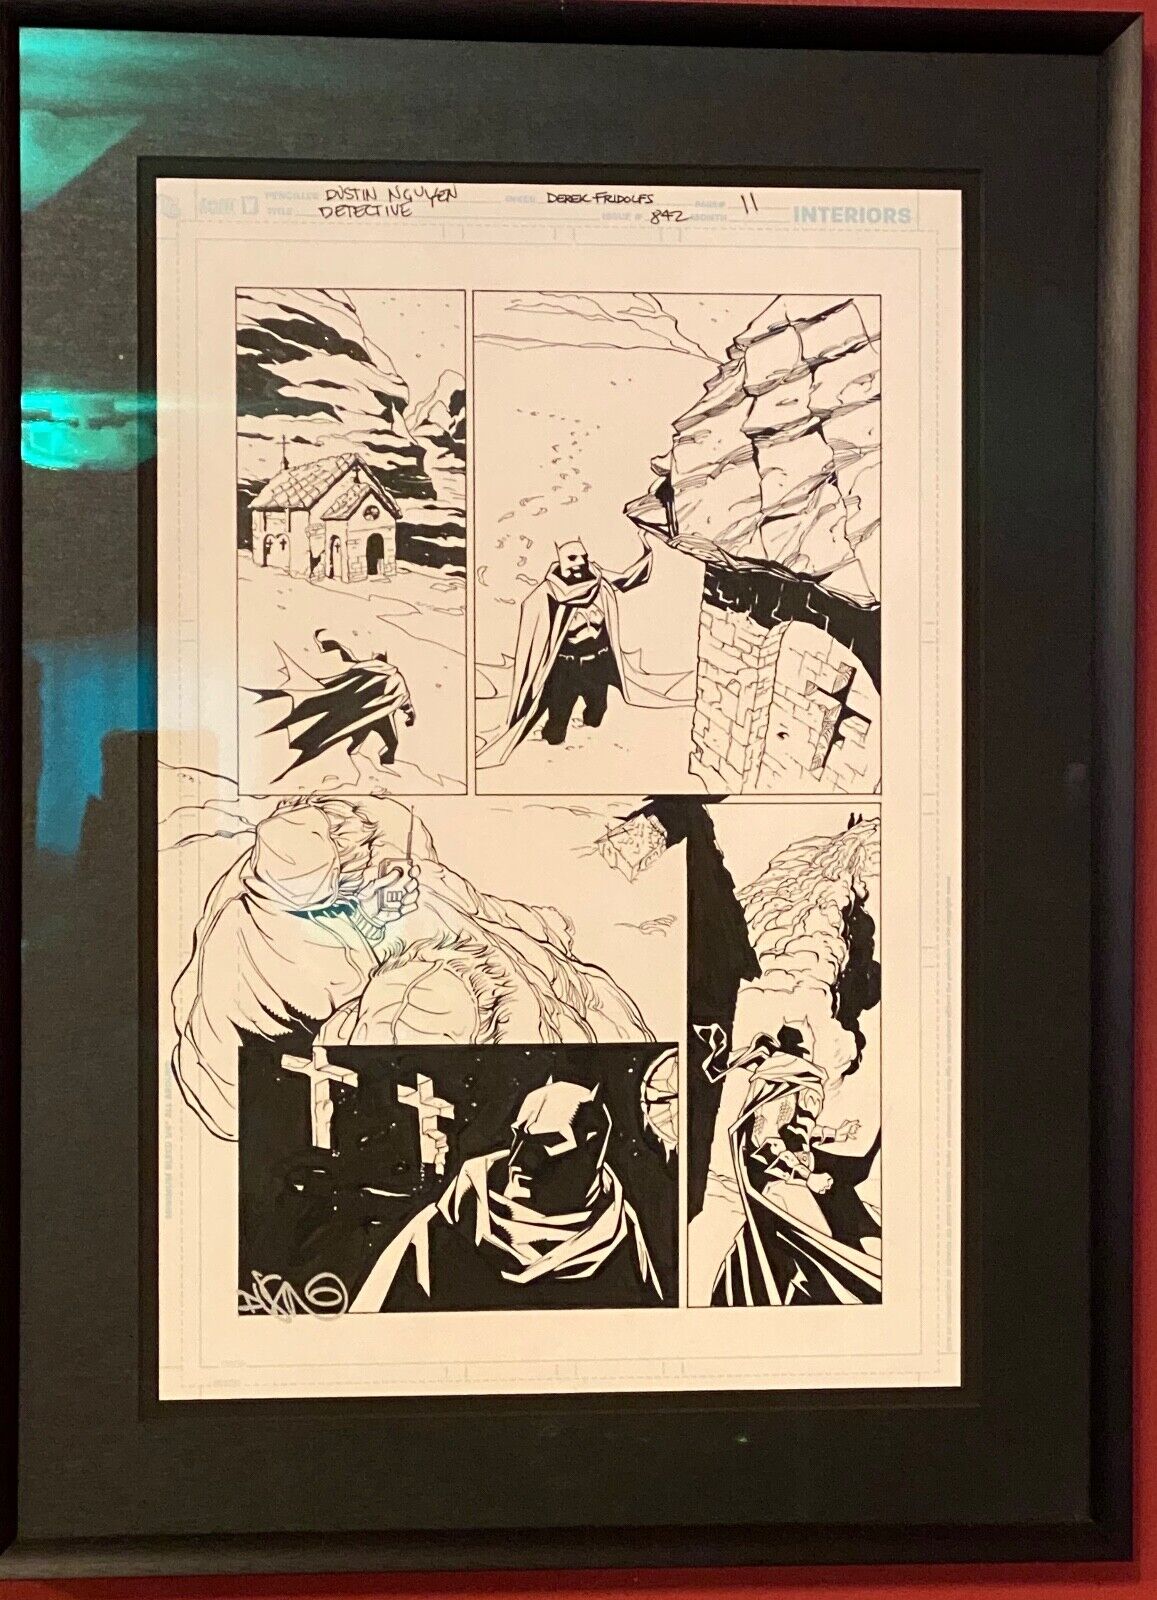 Detective Comics #842 Original Interior Page 11 by Dustin Nguyen Framed & Matted